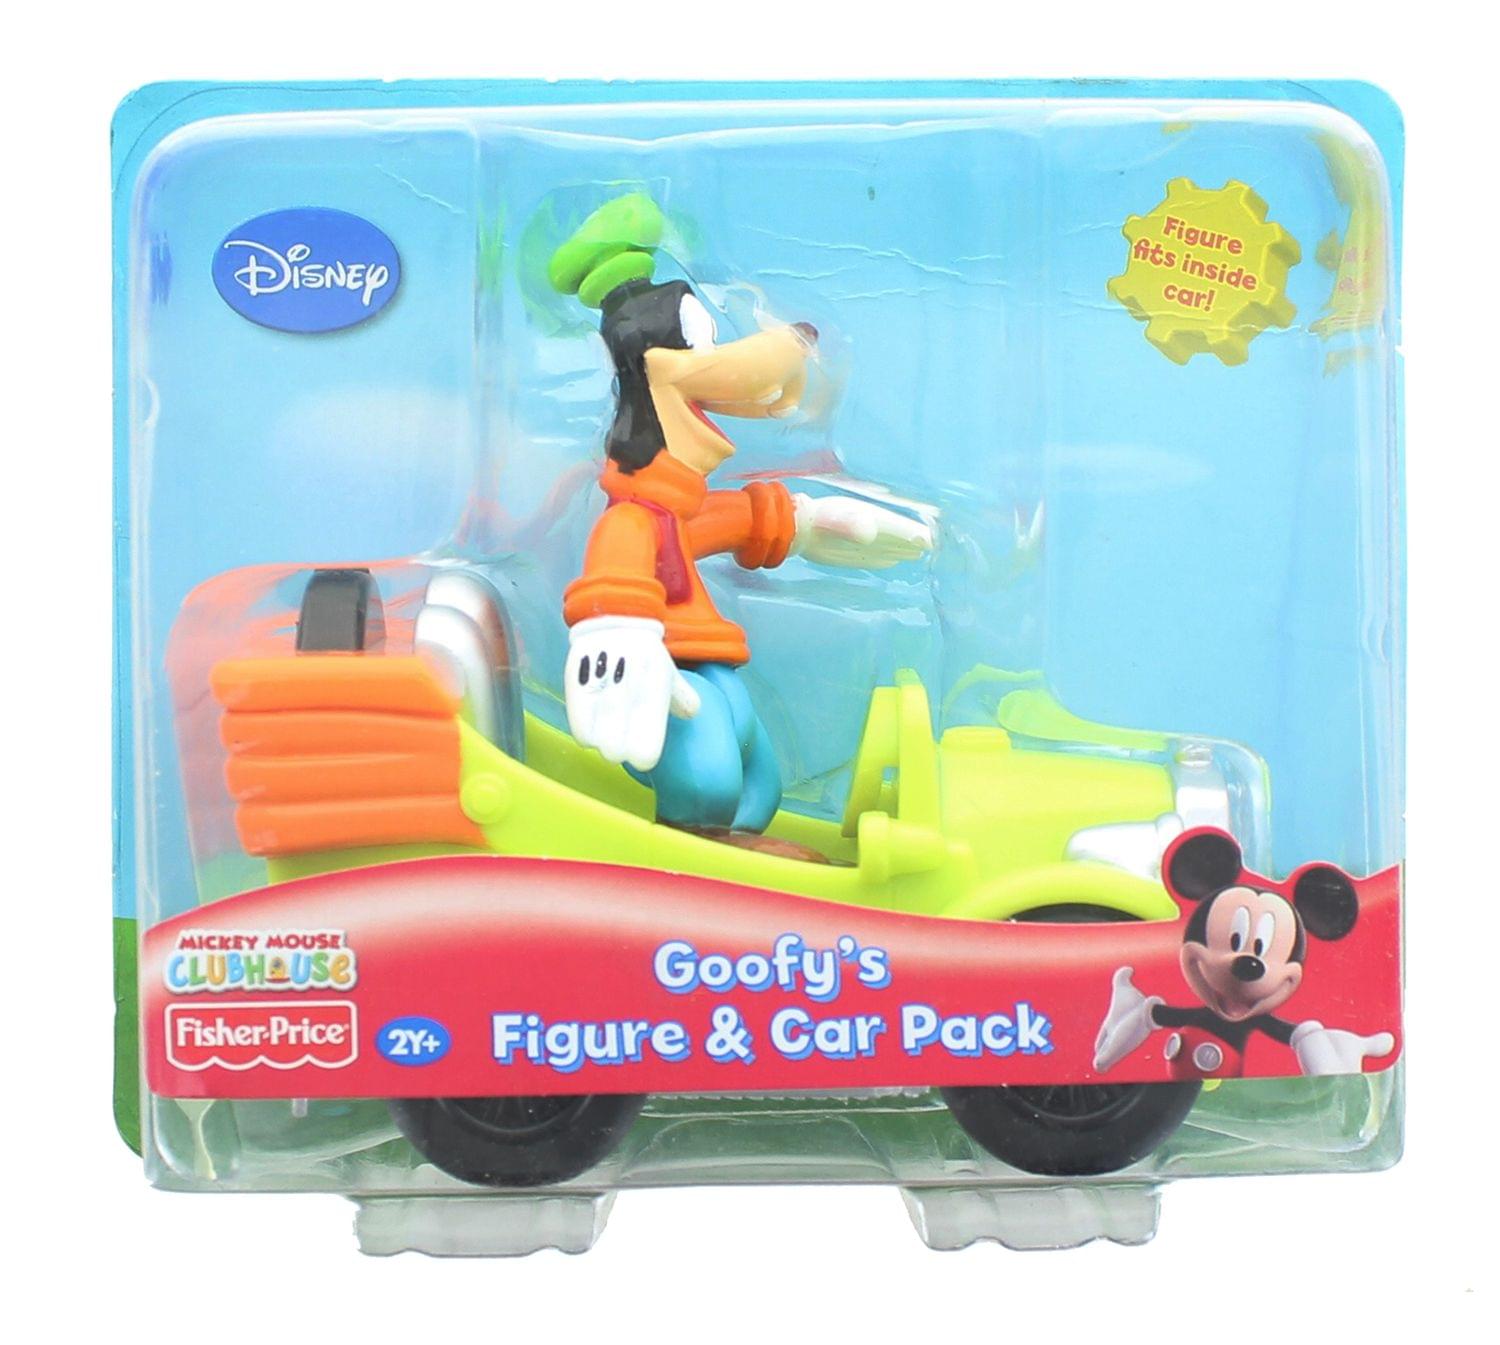 Mickey Mouse Clubhouse Goofy's Figure & Car Pack